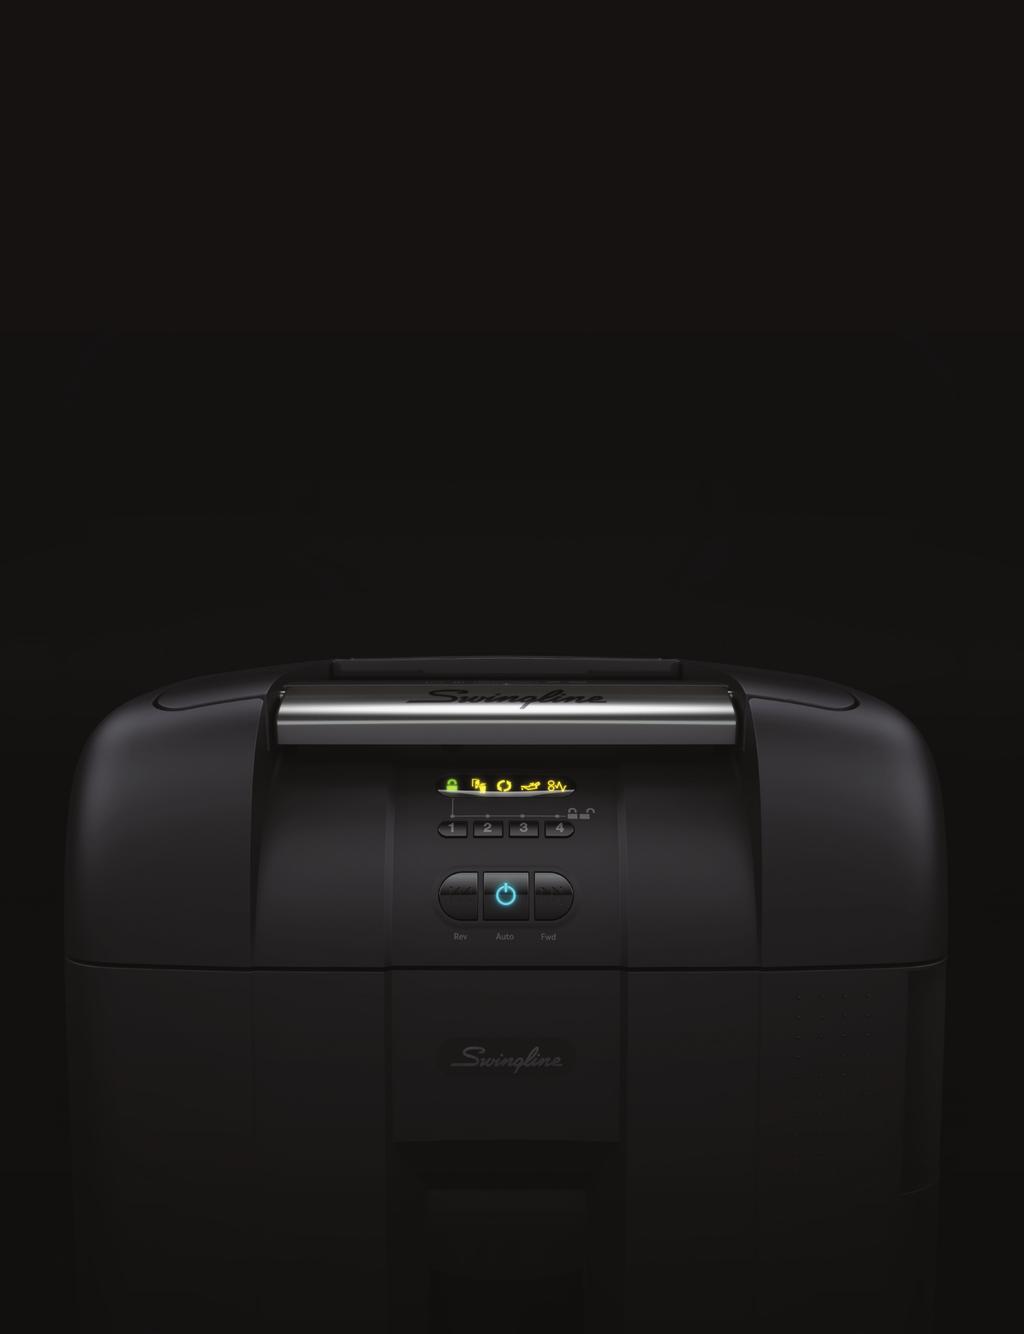 Lives up to advertisement. With a huge amount of shredding to do, I needed a trusted brand to deliver. This shredder is and performs exactly as published. This shredder is quiet & efficient!